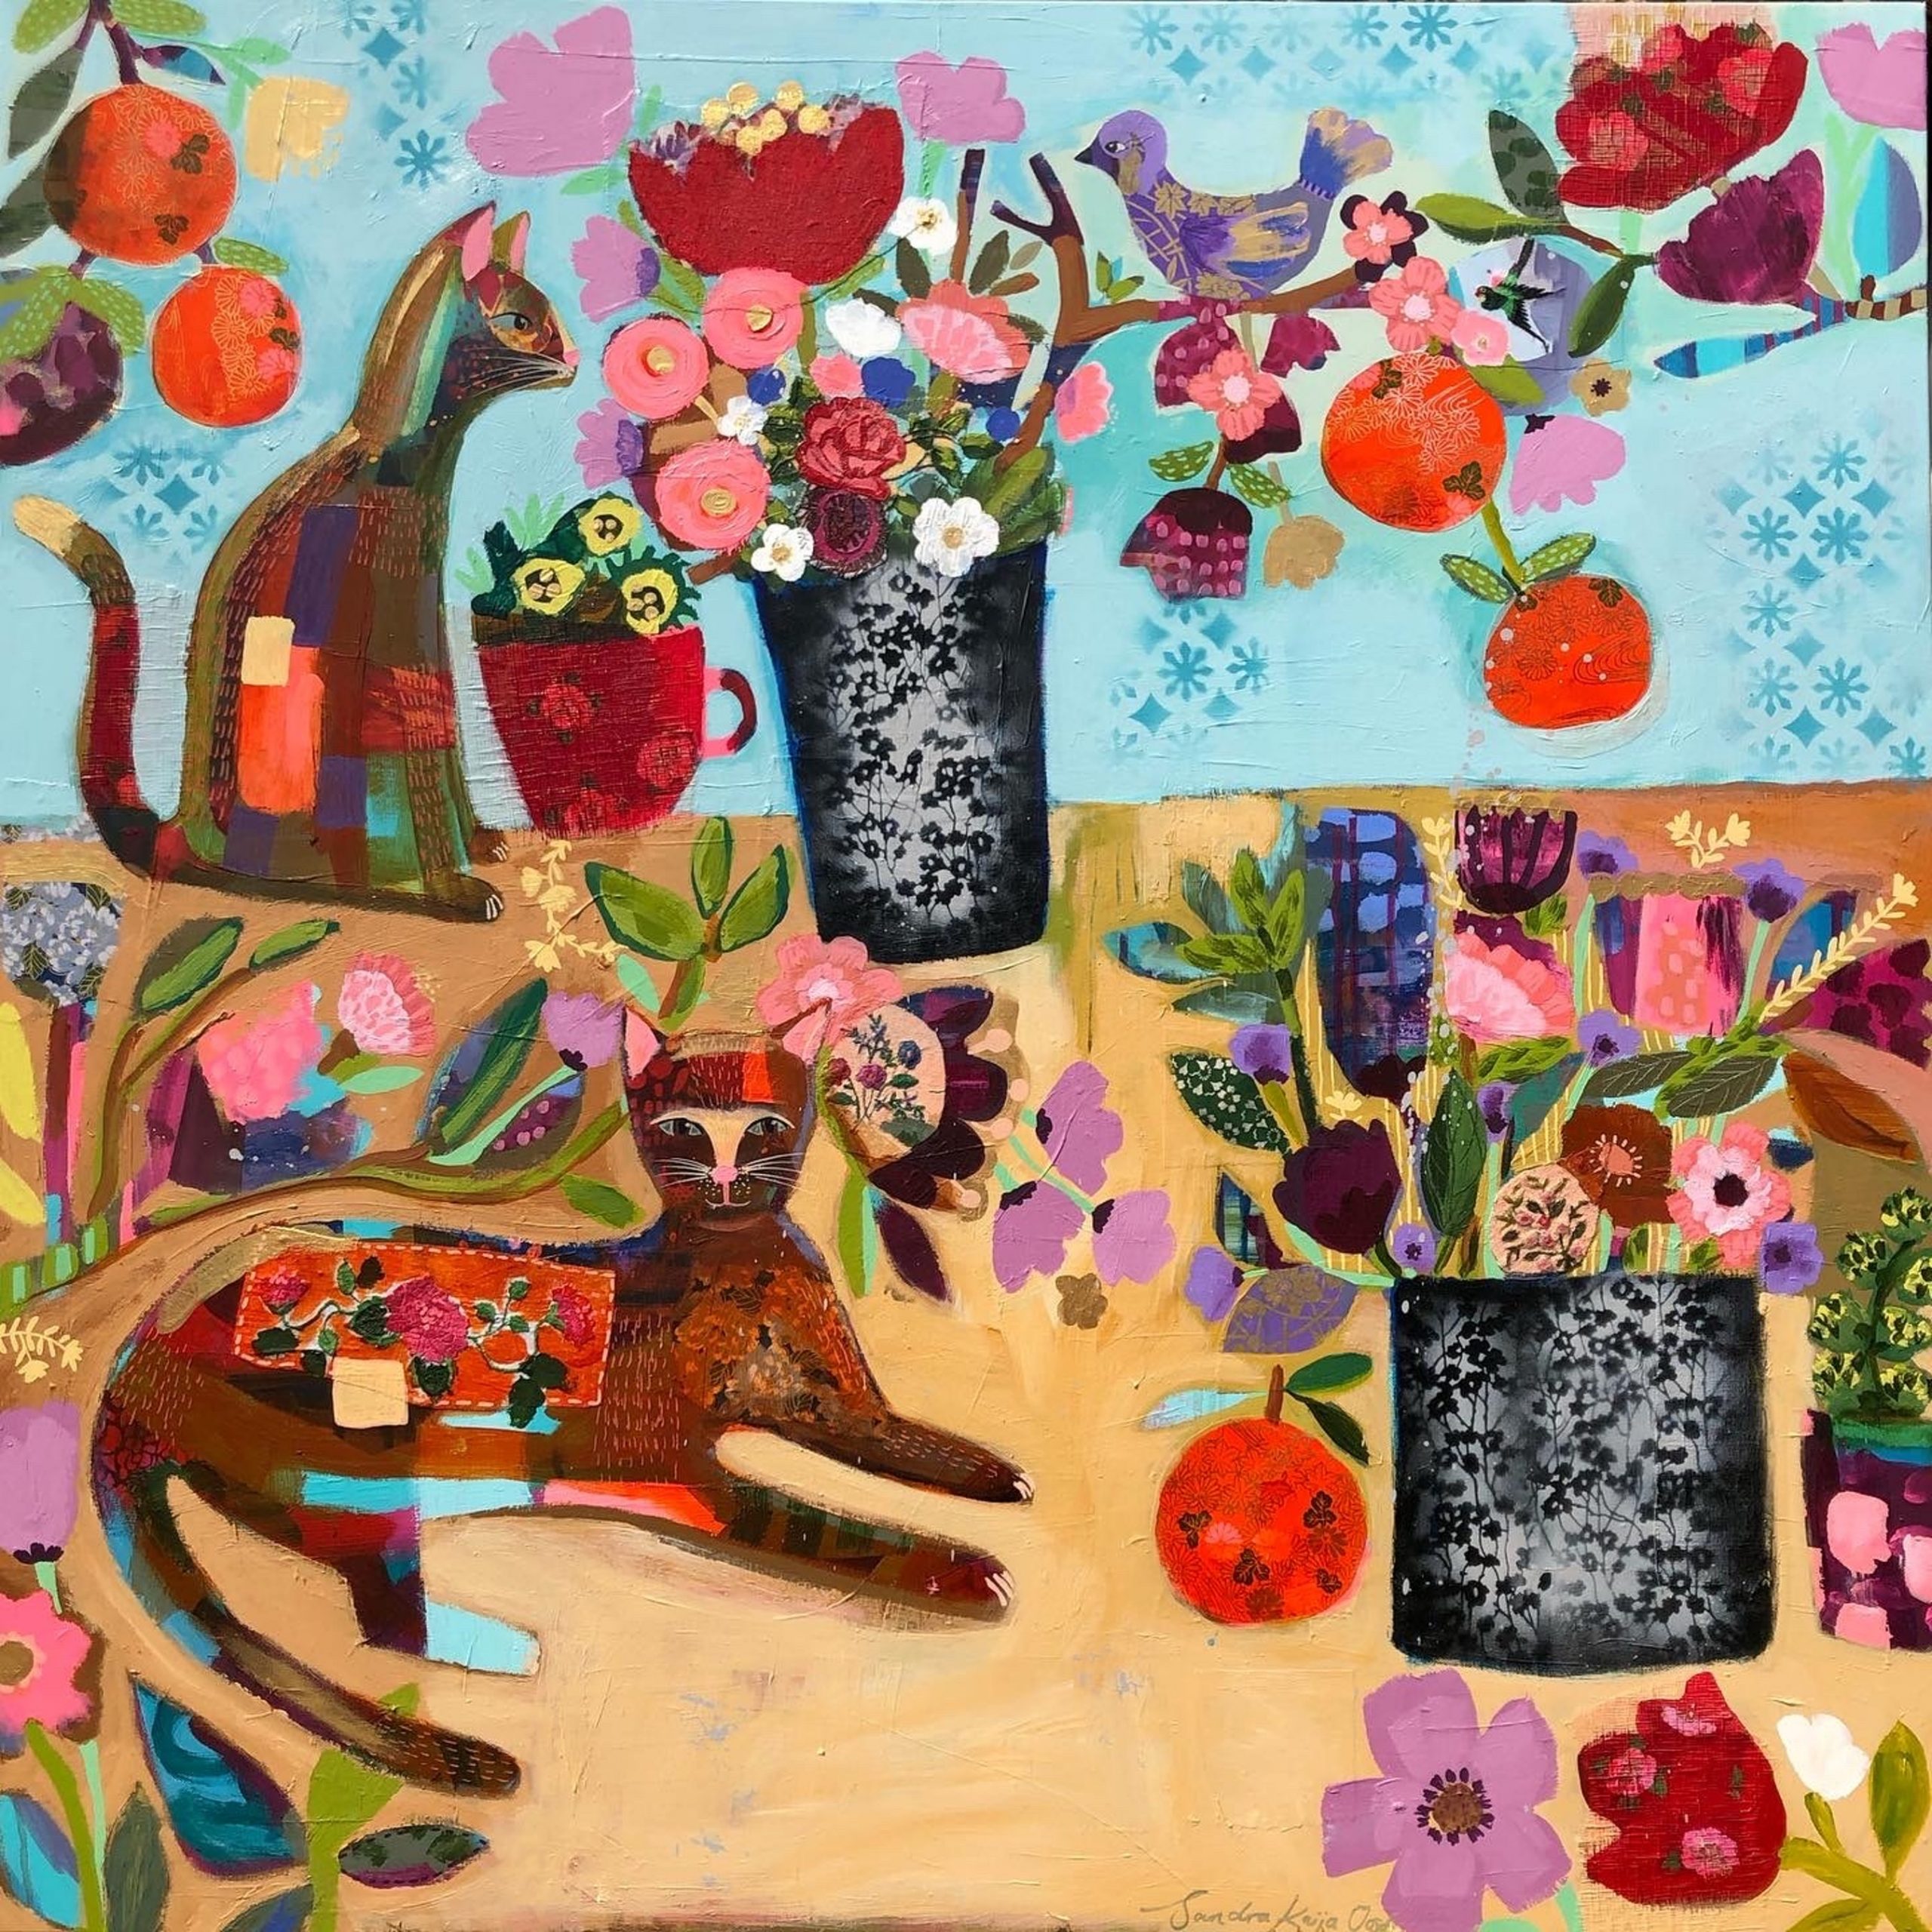 Cats & Oranges by Sandra Oost. Original Mixed Media painting in blue and orange.